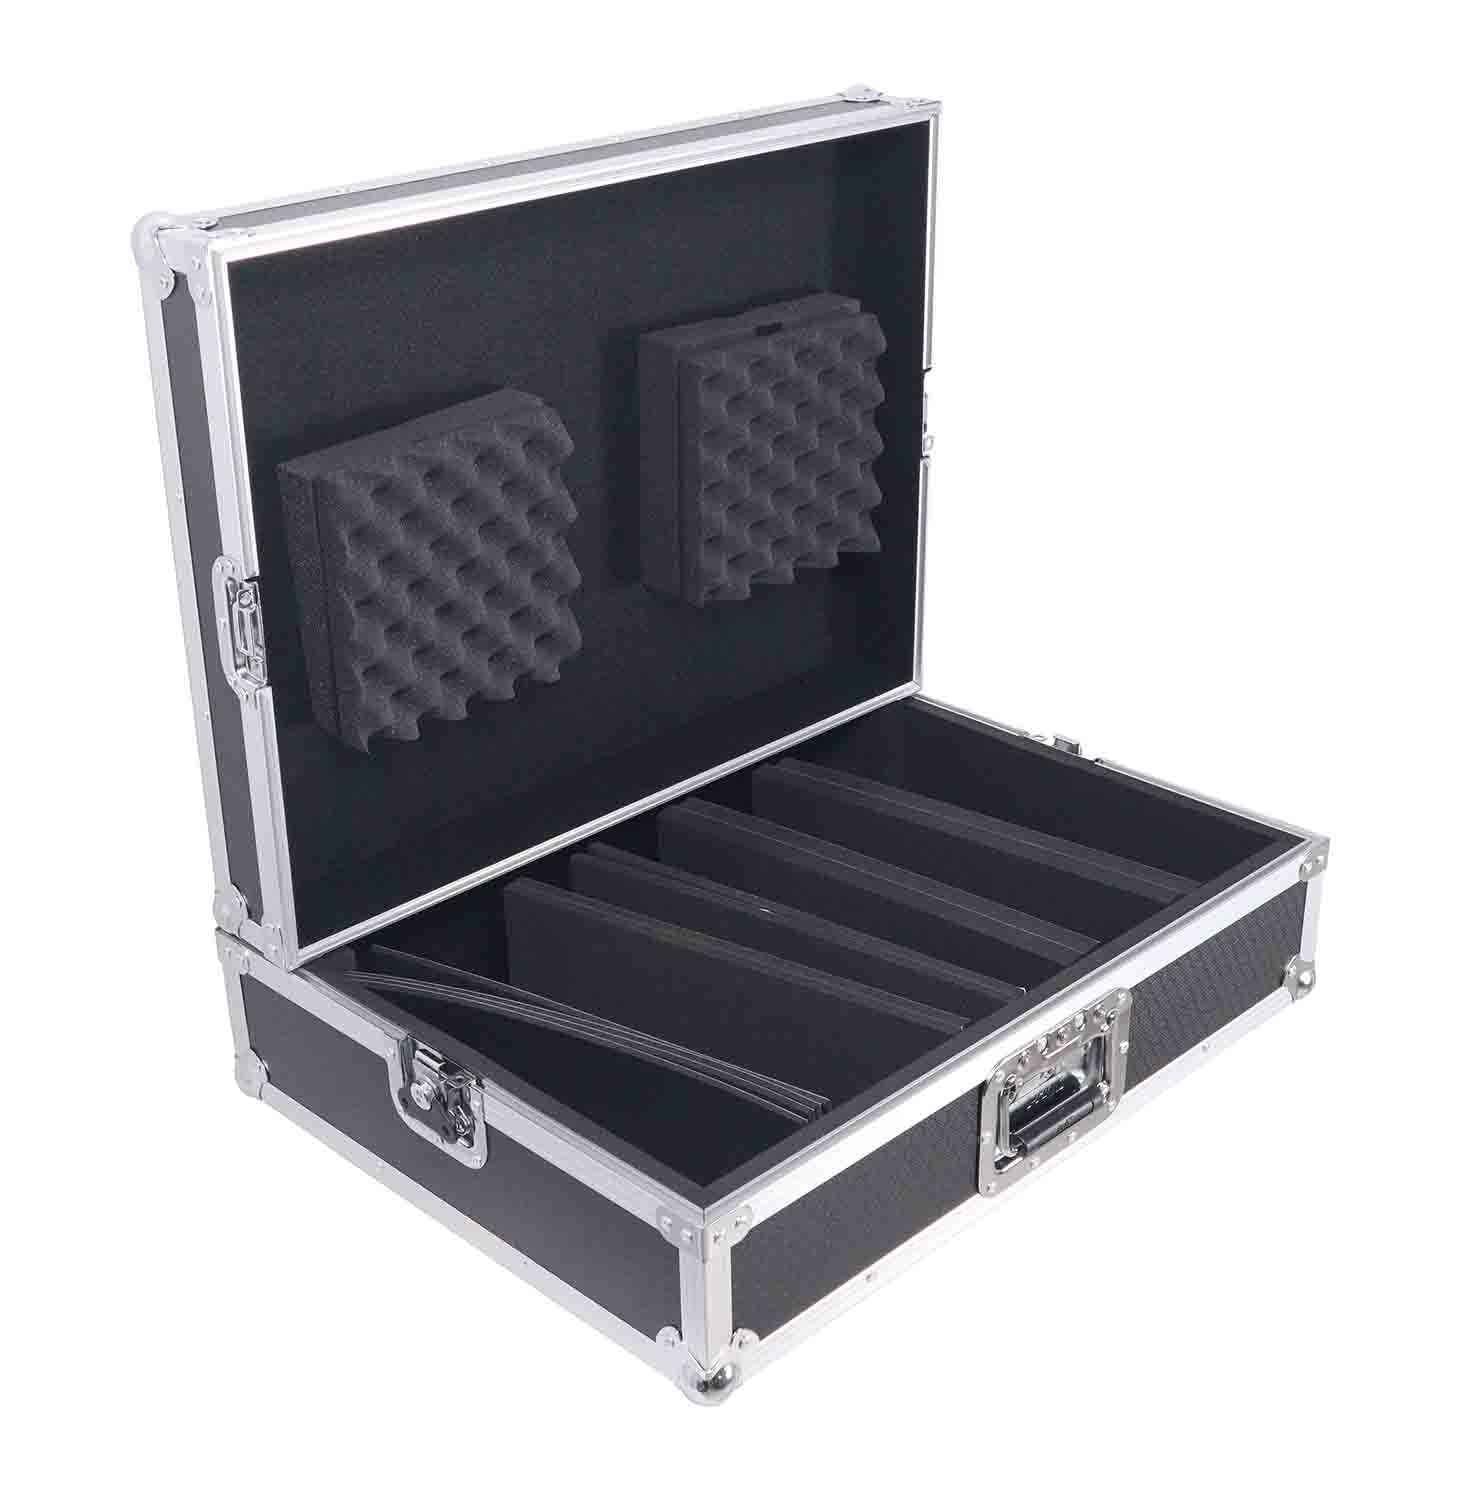 ProX XS-UMIX2415 Universal Mixer Road Case with Pluck n Pack Foam Fits up to 24"x15" - Hollywood DJ